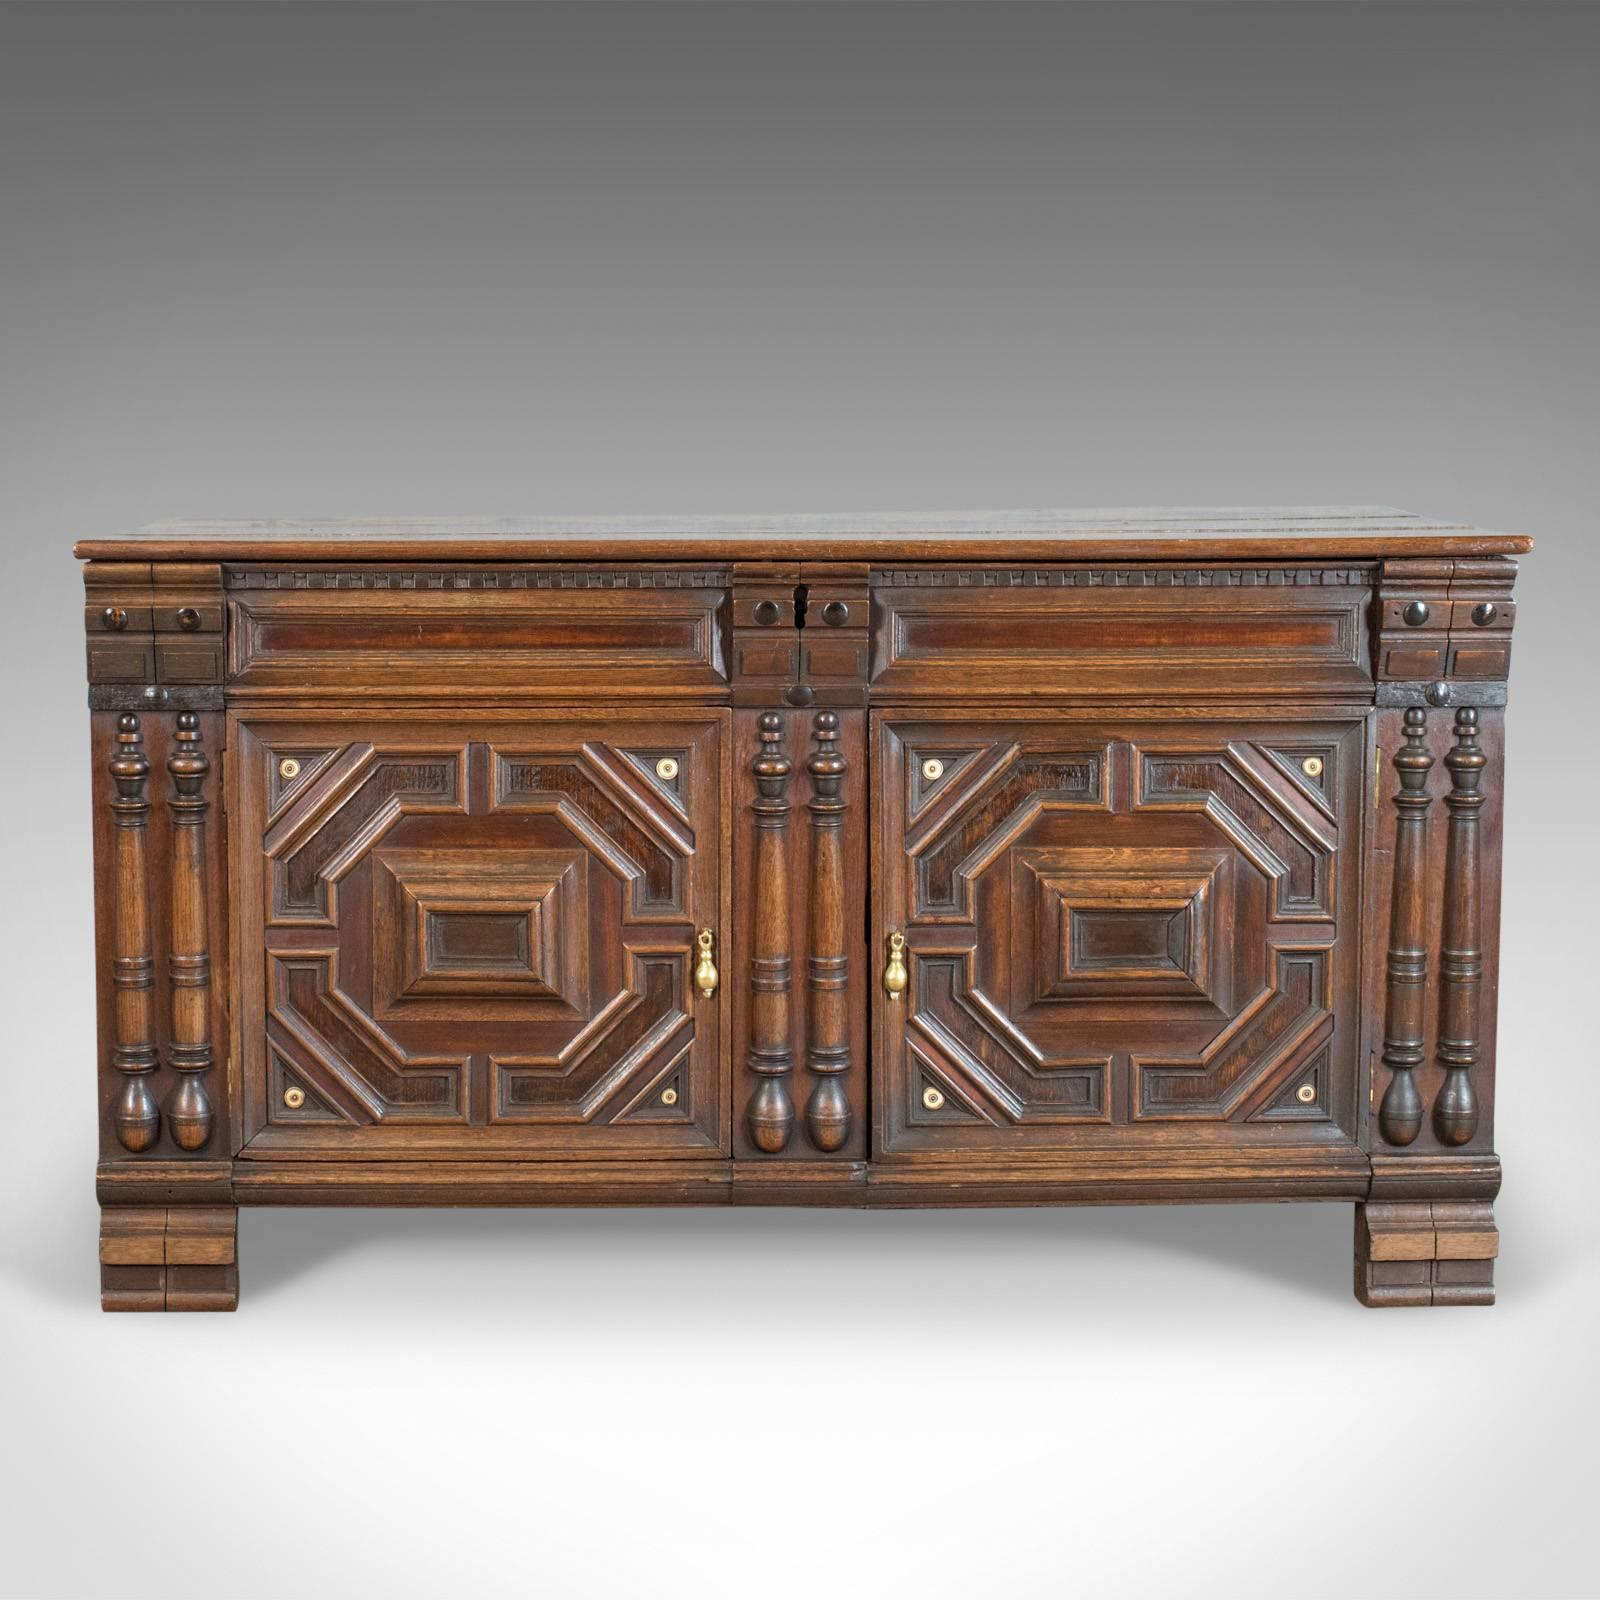 This is an antique chest, a French coffer in oak dating to the early 19th century, circa 1800.

Expertly and solidly crafted in stout stocks of oak
Attractive color displaying grain interest throughout
Desirable aged patina in the wax polished